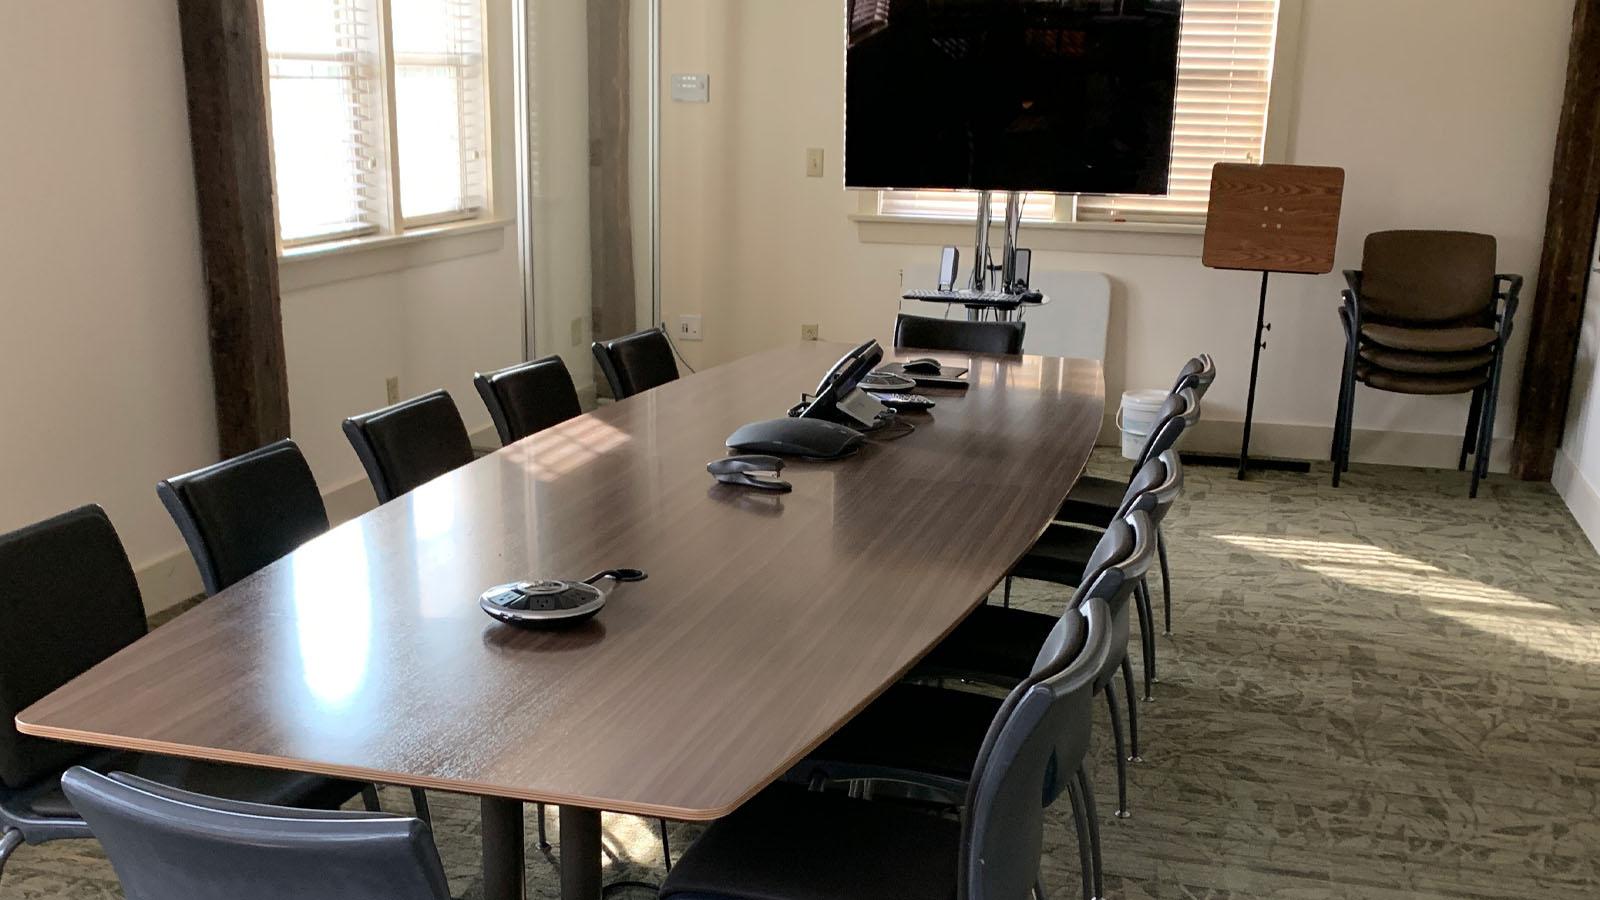 Long conference room table with TV at the head